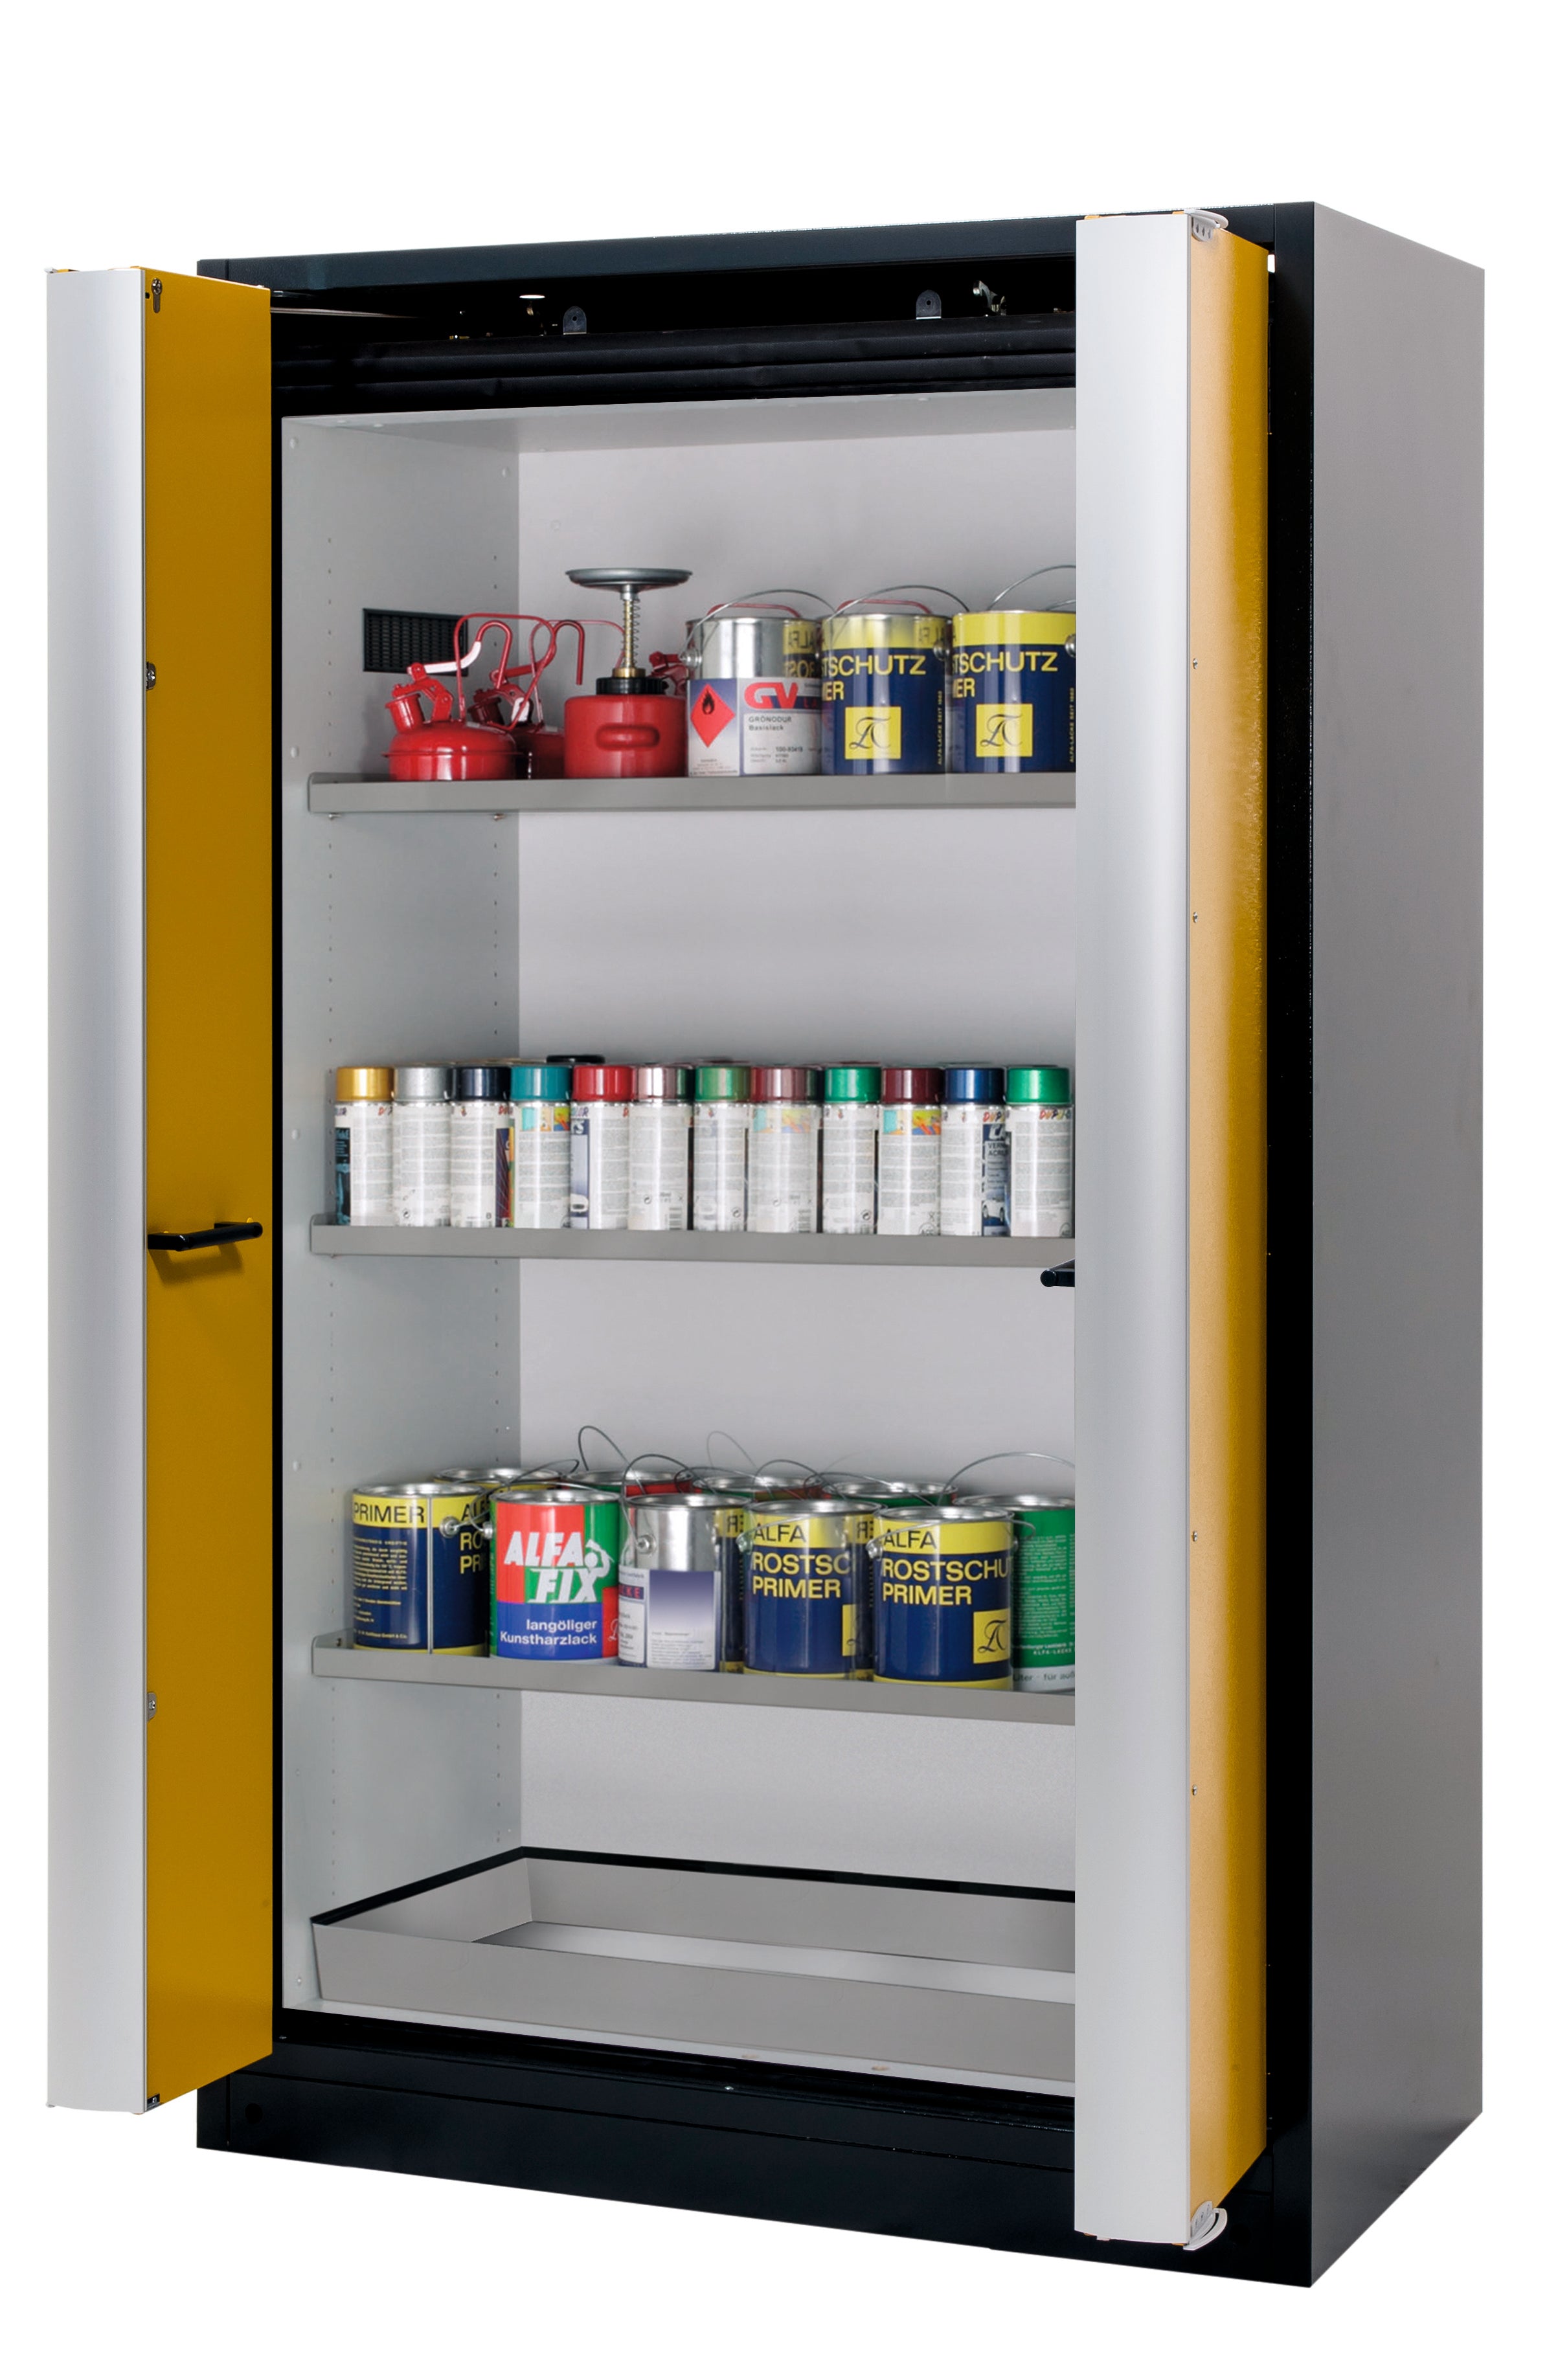 Type 90 safety cabinet Q-PHOENIX-90 model Q90.195.120.FD in safety yellow RAL 1004 with 3x standard shelves (stainless steel 1.4301)